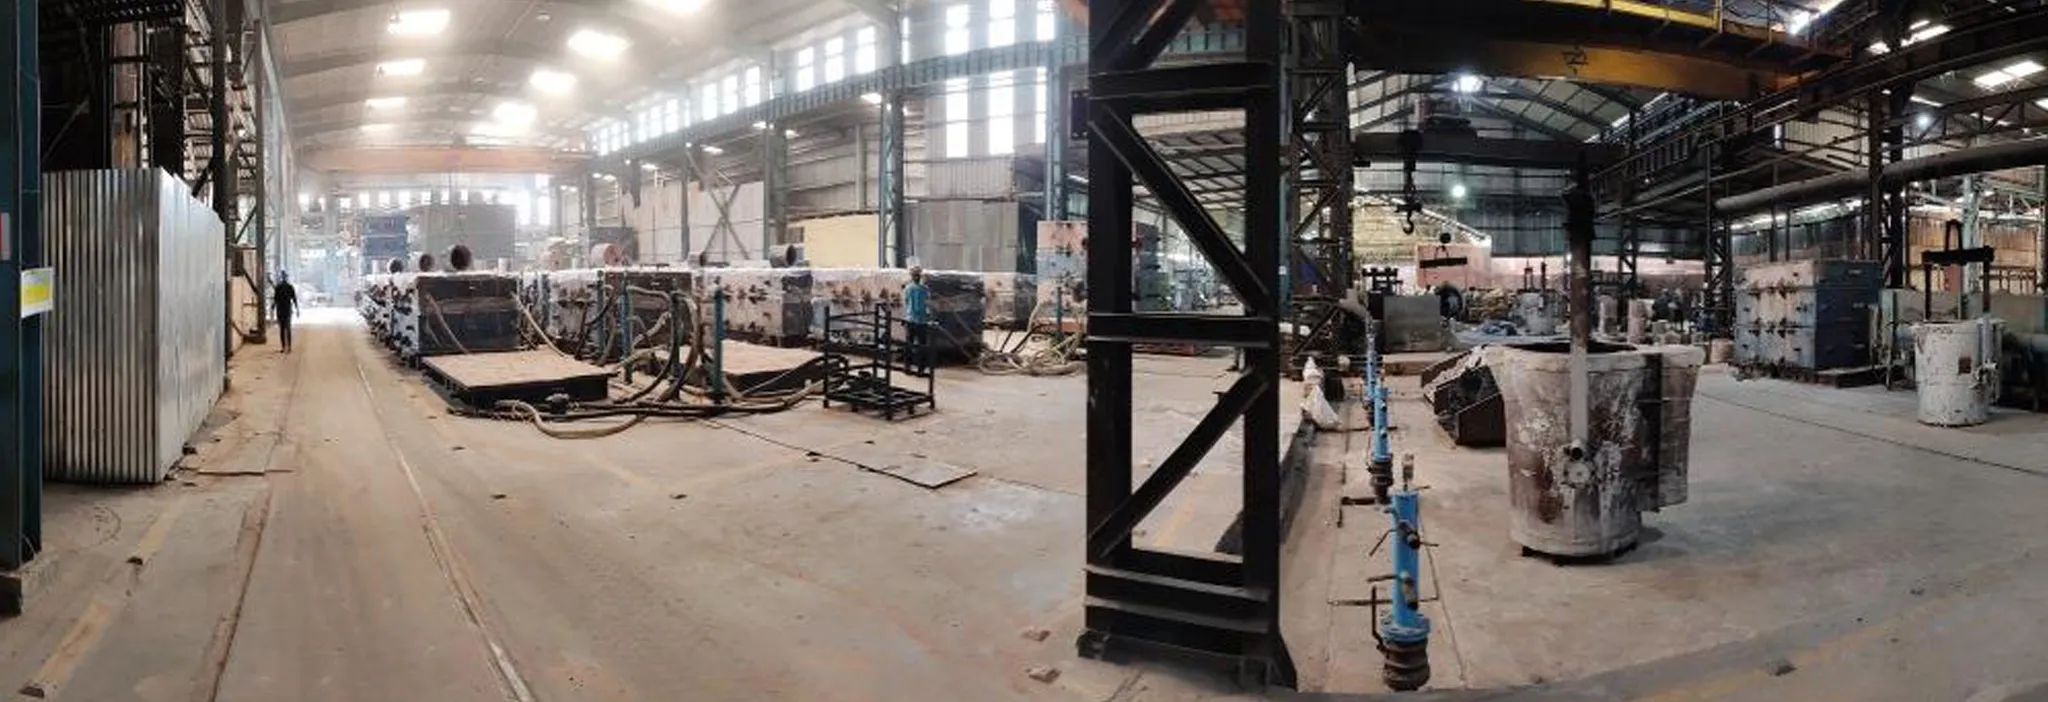 Inside Crescent Foundry